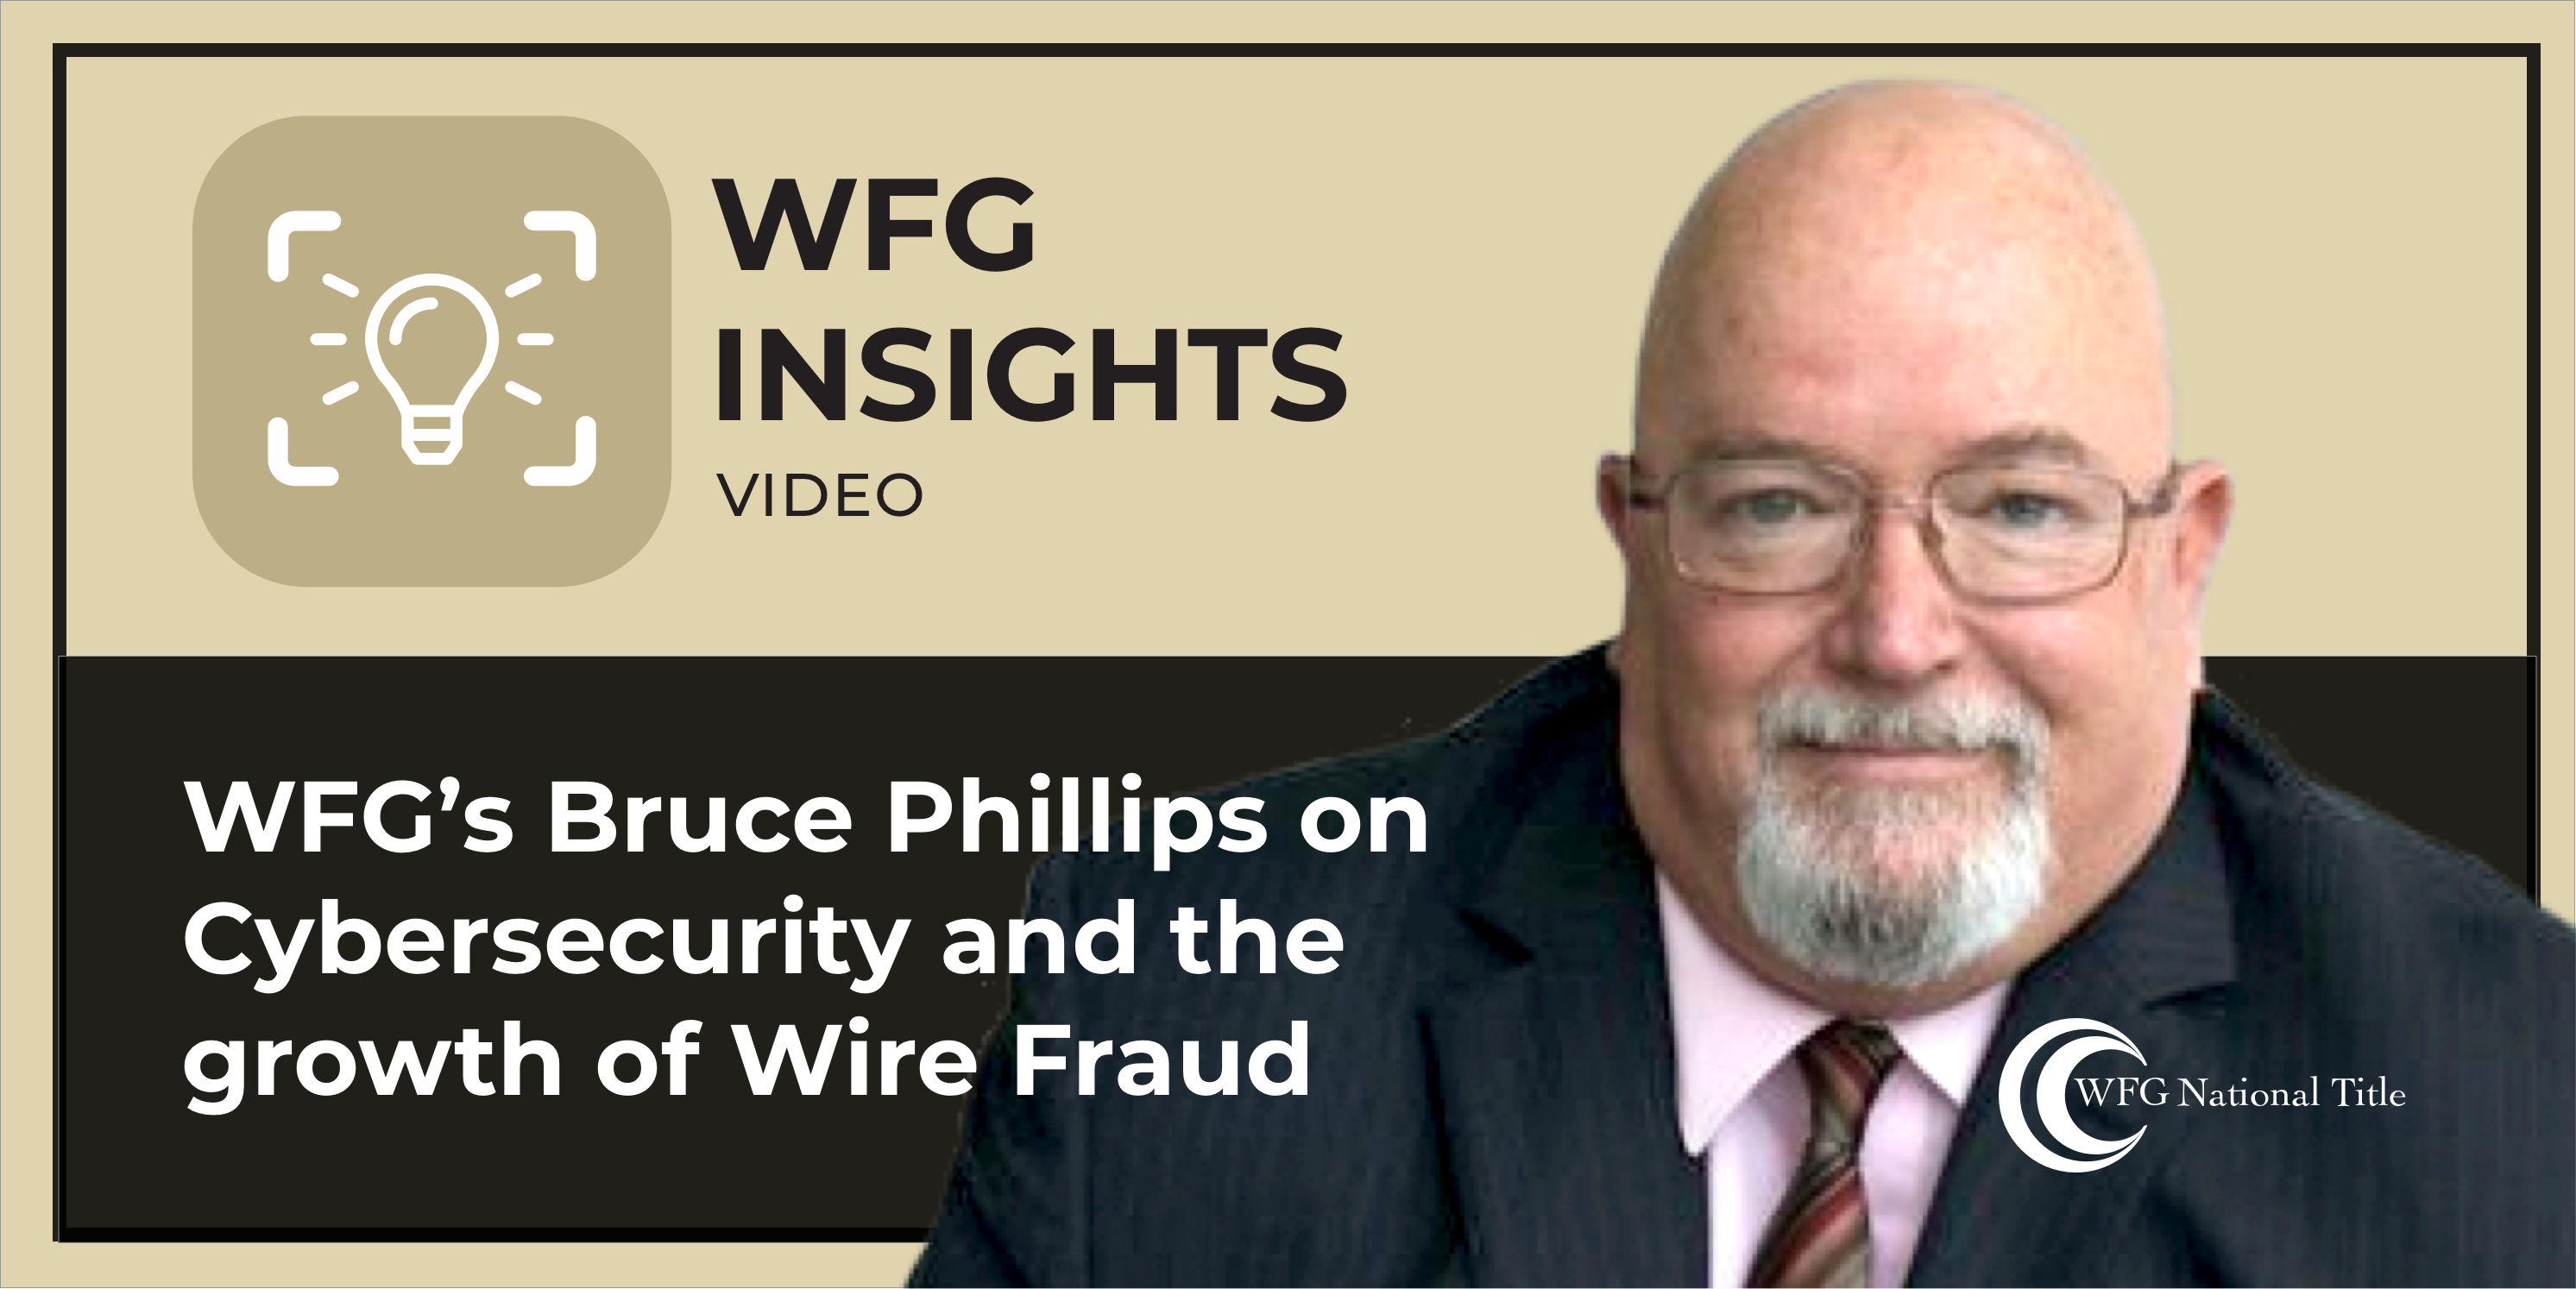 WFG’s Bruce Phillips on Cybersecurity and the Growth of Wire Fraud